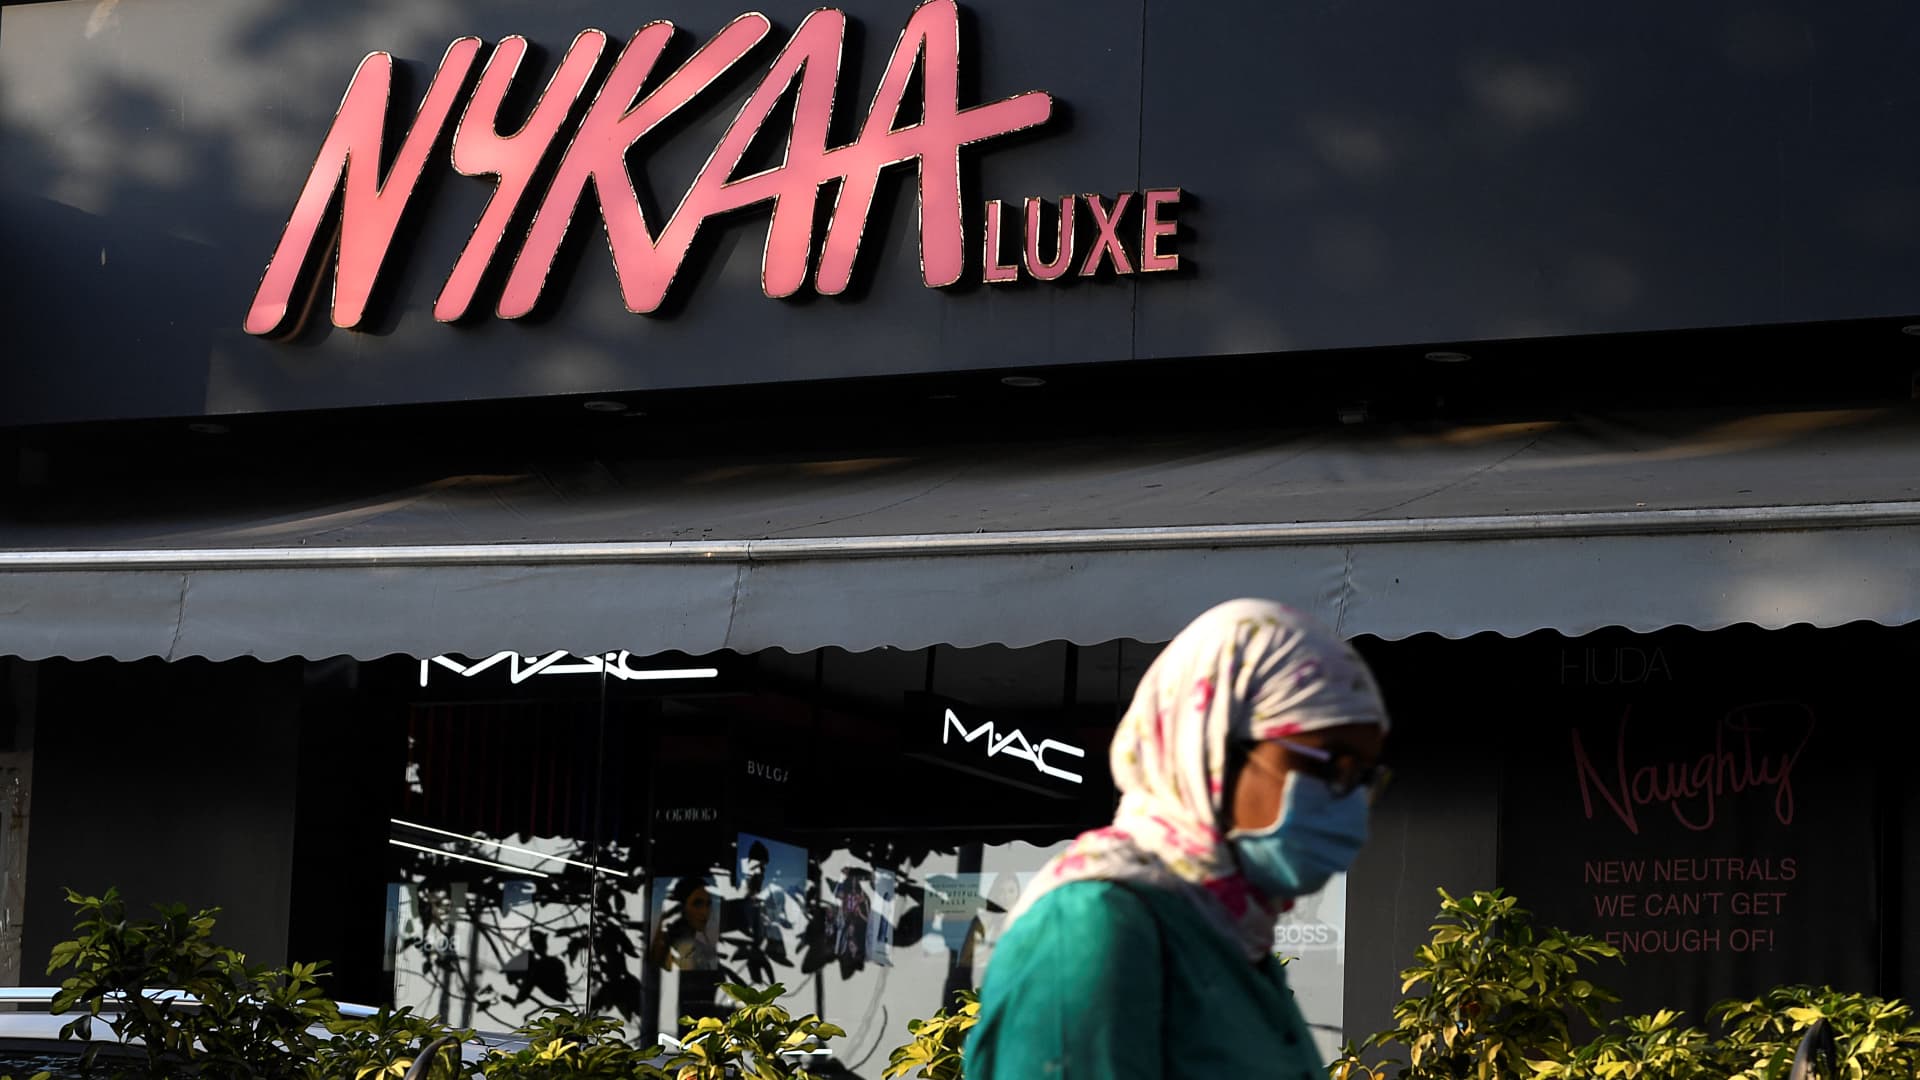 Buzz Update Indian beauty company Nykaa looks to physical retail expansion to meet consumer demand for offline
TOU